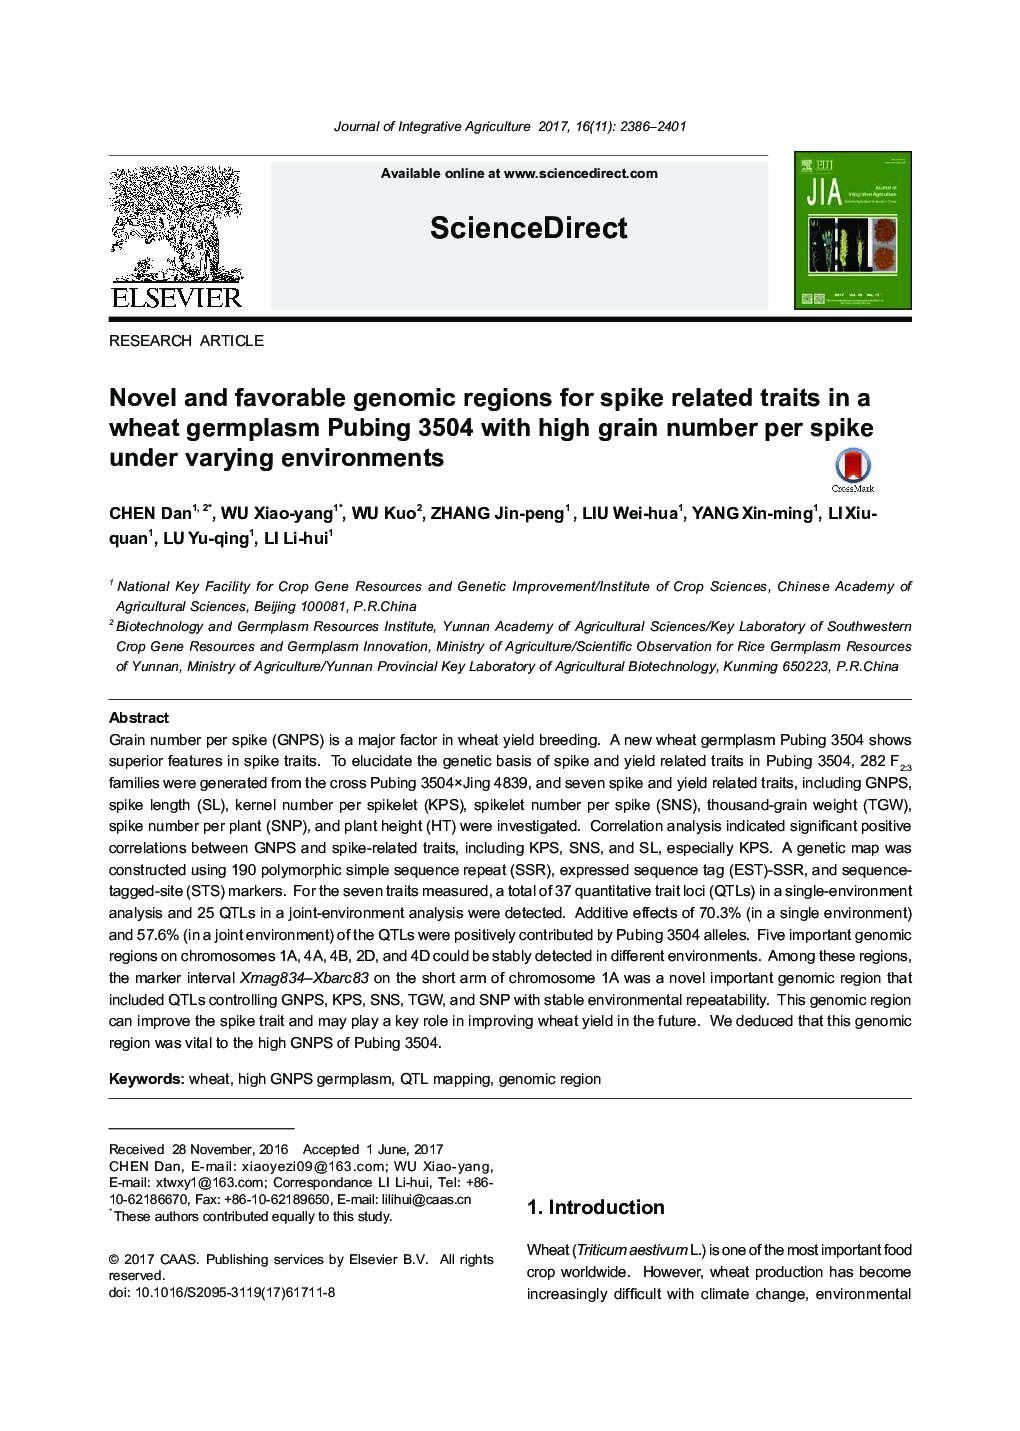 Novel and favorable genomic regions for spike related traits in a wheat germplasm Pubing 3504 with high grain number per spike under varying environments